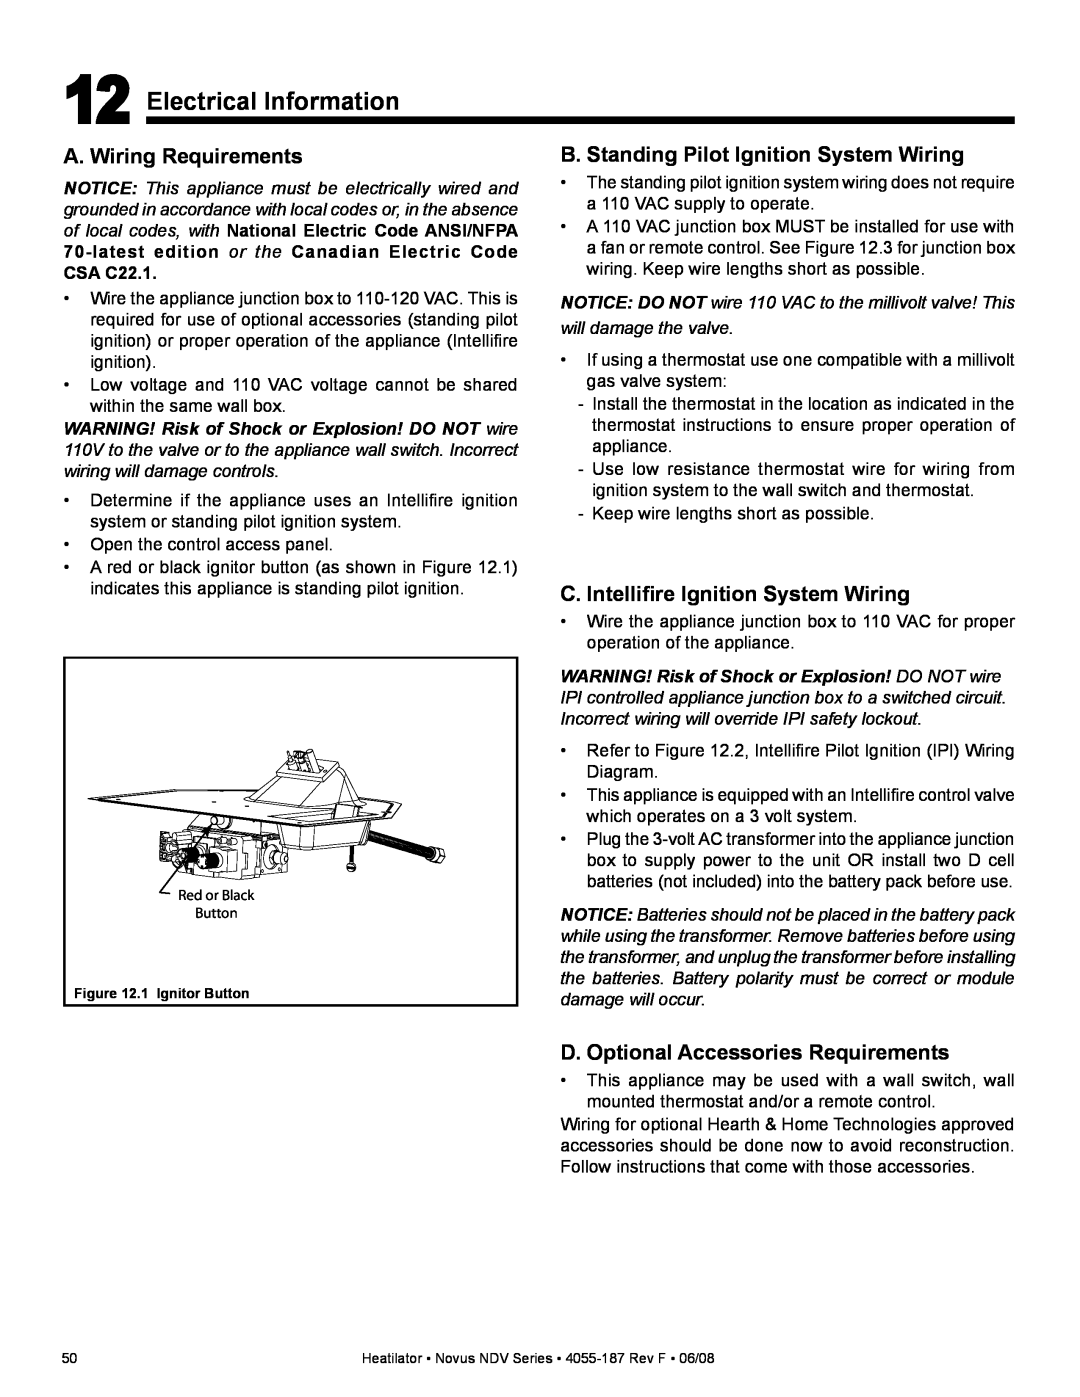 Hearth and Home Technologies NDV3933L Electrical Information, A. Wiring Requirements, C. Intelliﬁre Ignition System Wiring 